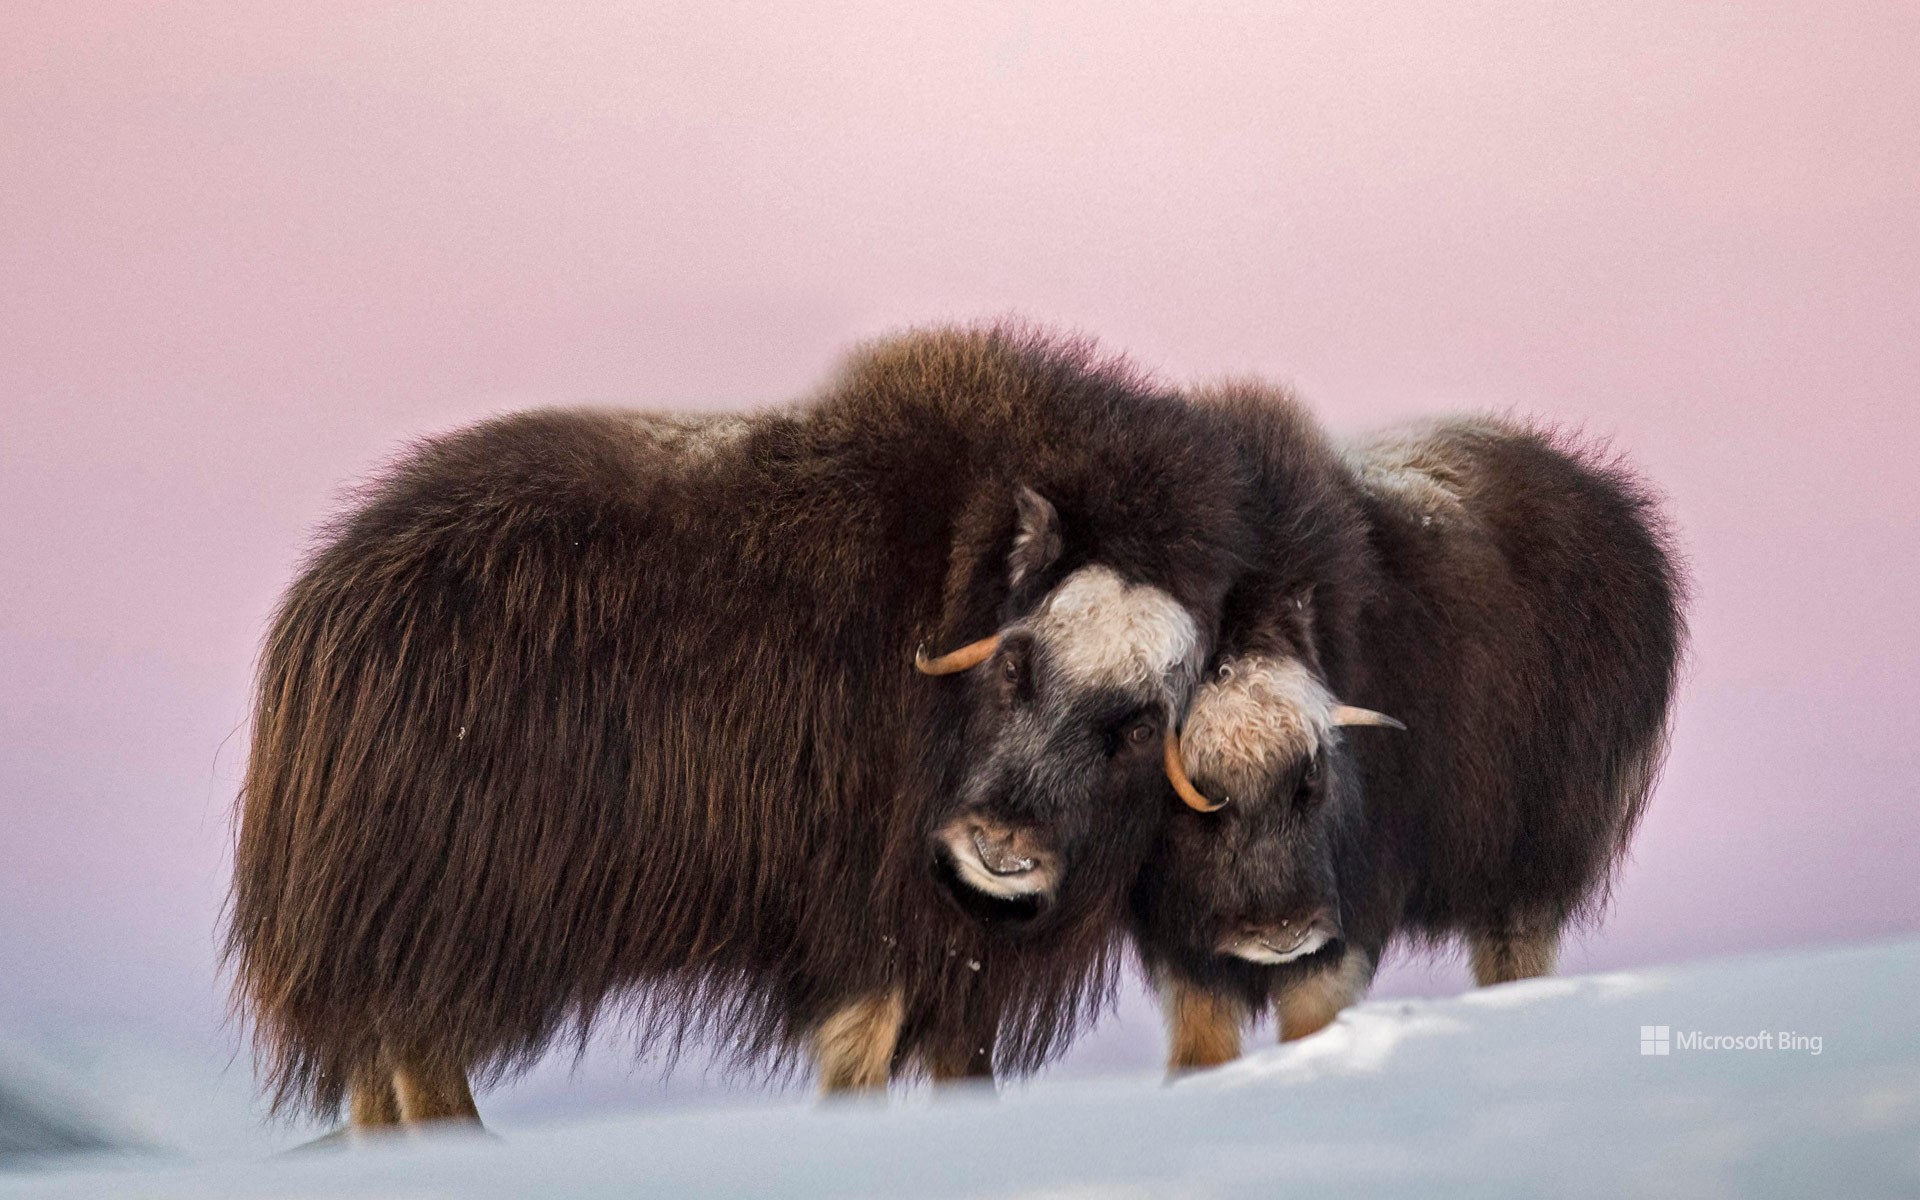 Muskox mother and calf in Dovre-Sunndalsfjella National Park, Norway